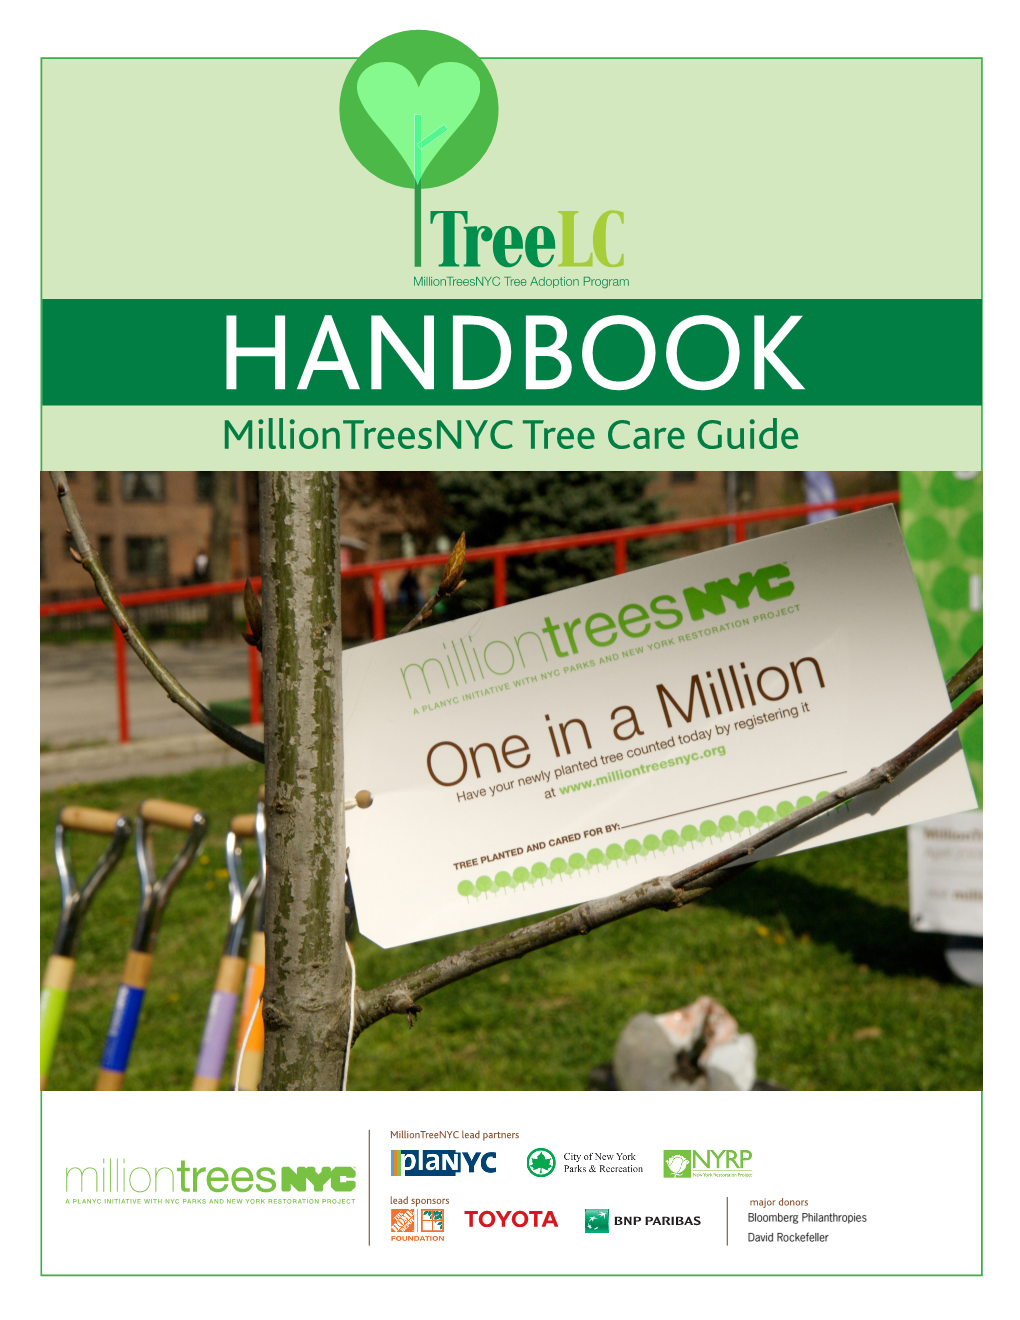 Treelc Handbook Is Designed to Be Useful to New York City Residents Who Are Interested in Adopt- Ing and Caring for Trees in Their Neighborhood